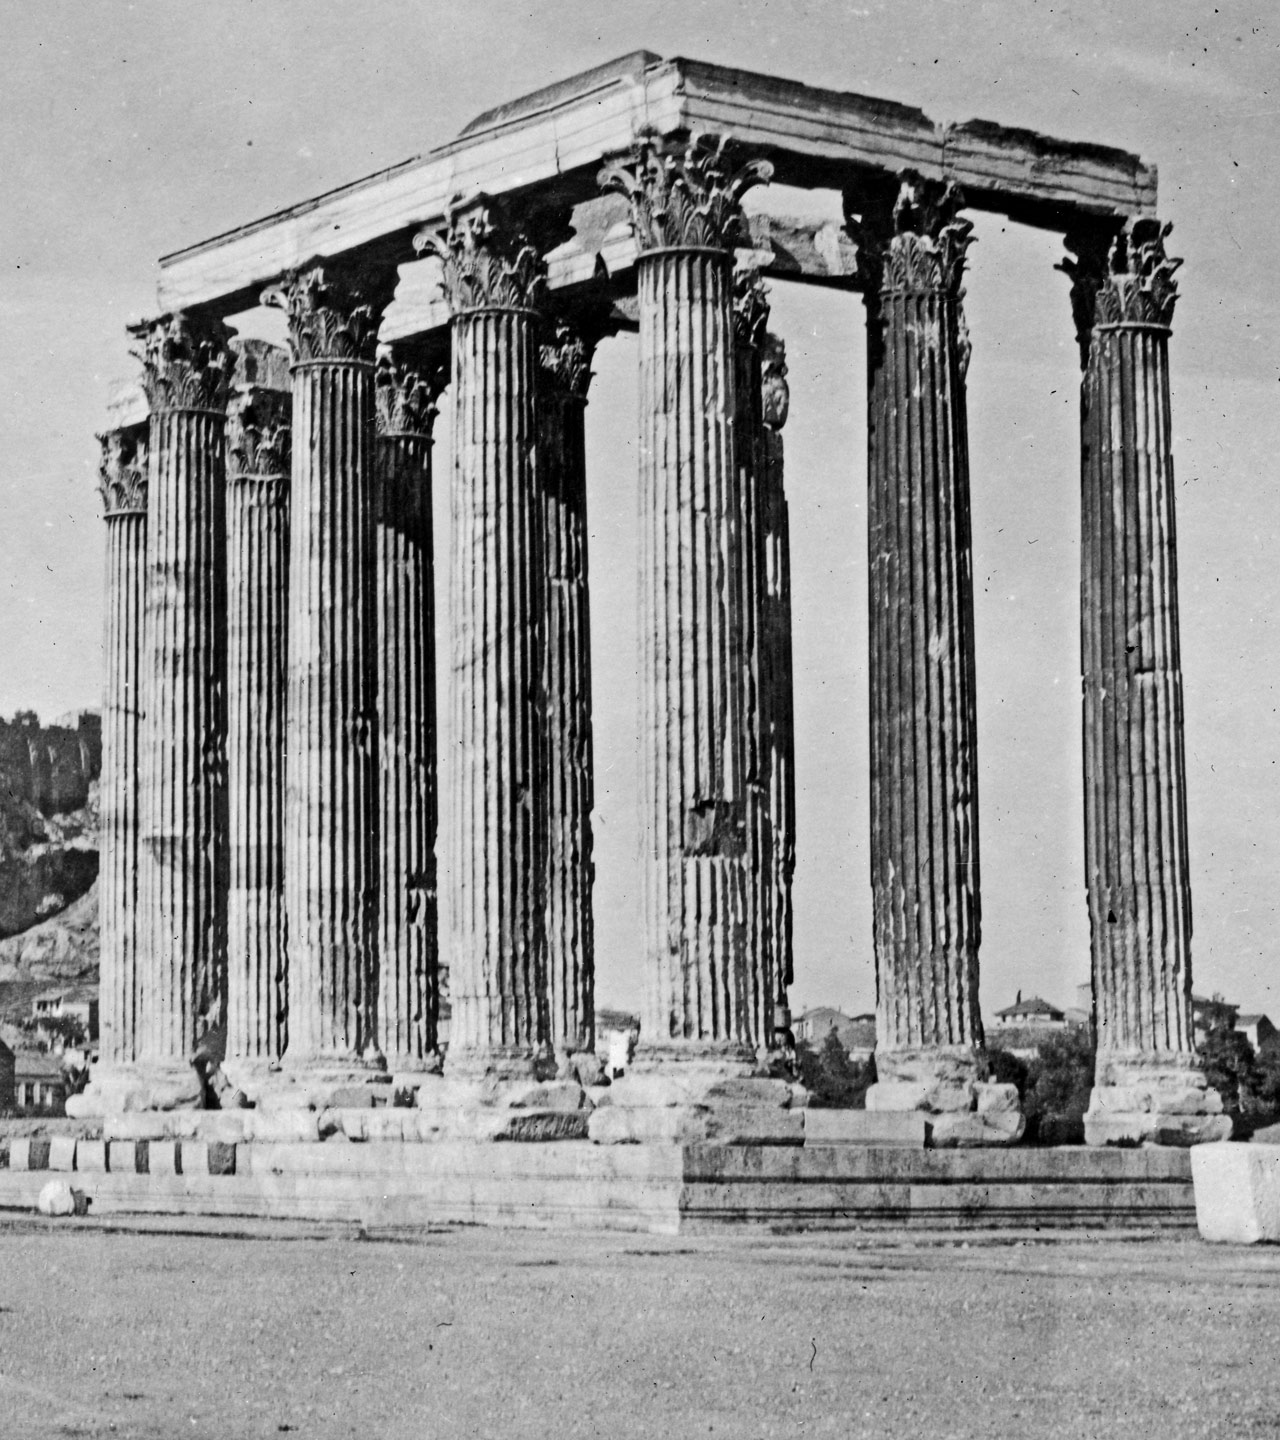 Where Fluted Columns Originated. The Temple of Jupiter near the Acropolis at Athens, the original fluted column structure, and the pattern of which is now used for all first class bank buildings, lamp posts and courthouses back in America. Before this magnificent ruin there was established the first ARC relief station in Athens, where thousands of Greek sufferers from the war were cared for. Below it is the Red Cross hospital where Greek girls are learning modern nursing methods under American instruction. America came to Greece for its architecture and in return has taught Greece better standards of living